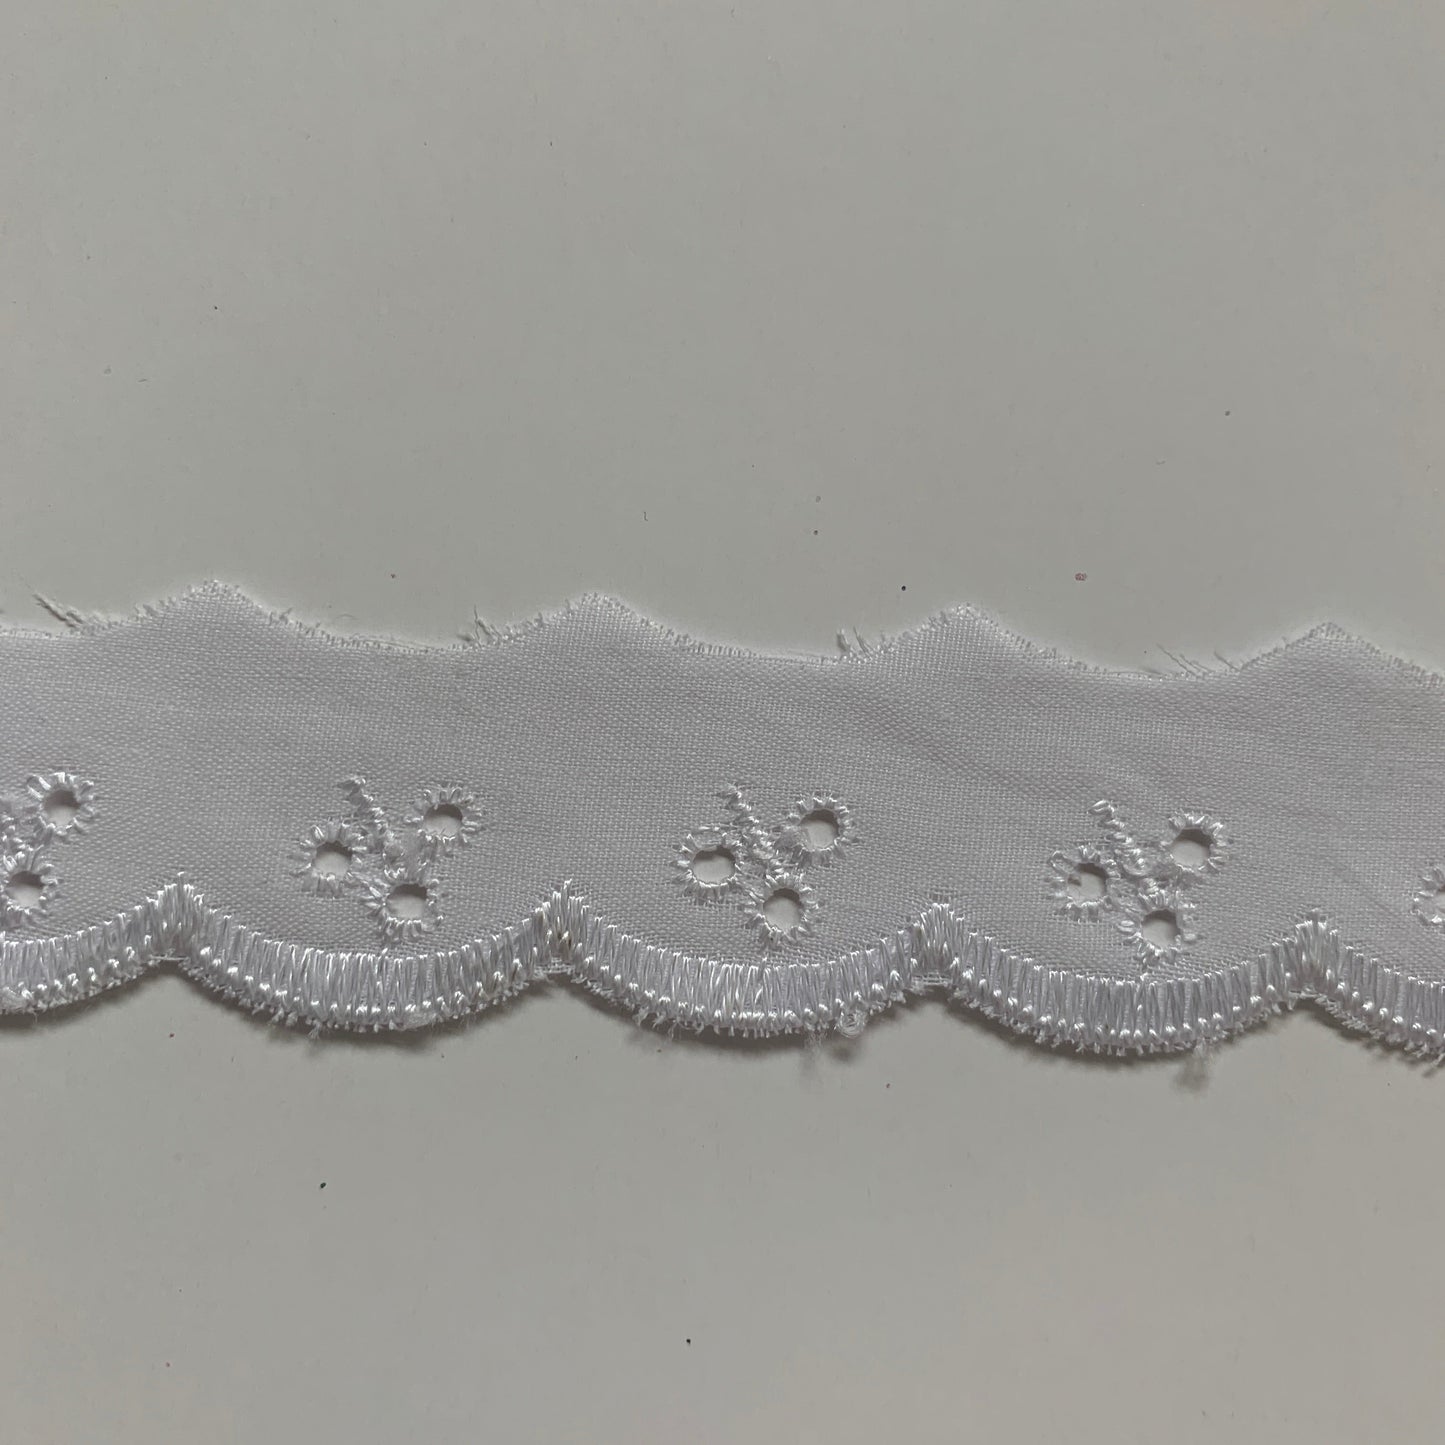 DOVECRAFT Broaderie Anglaise Lace Trim